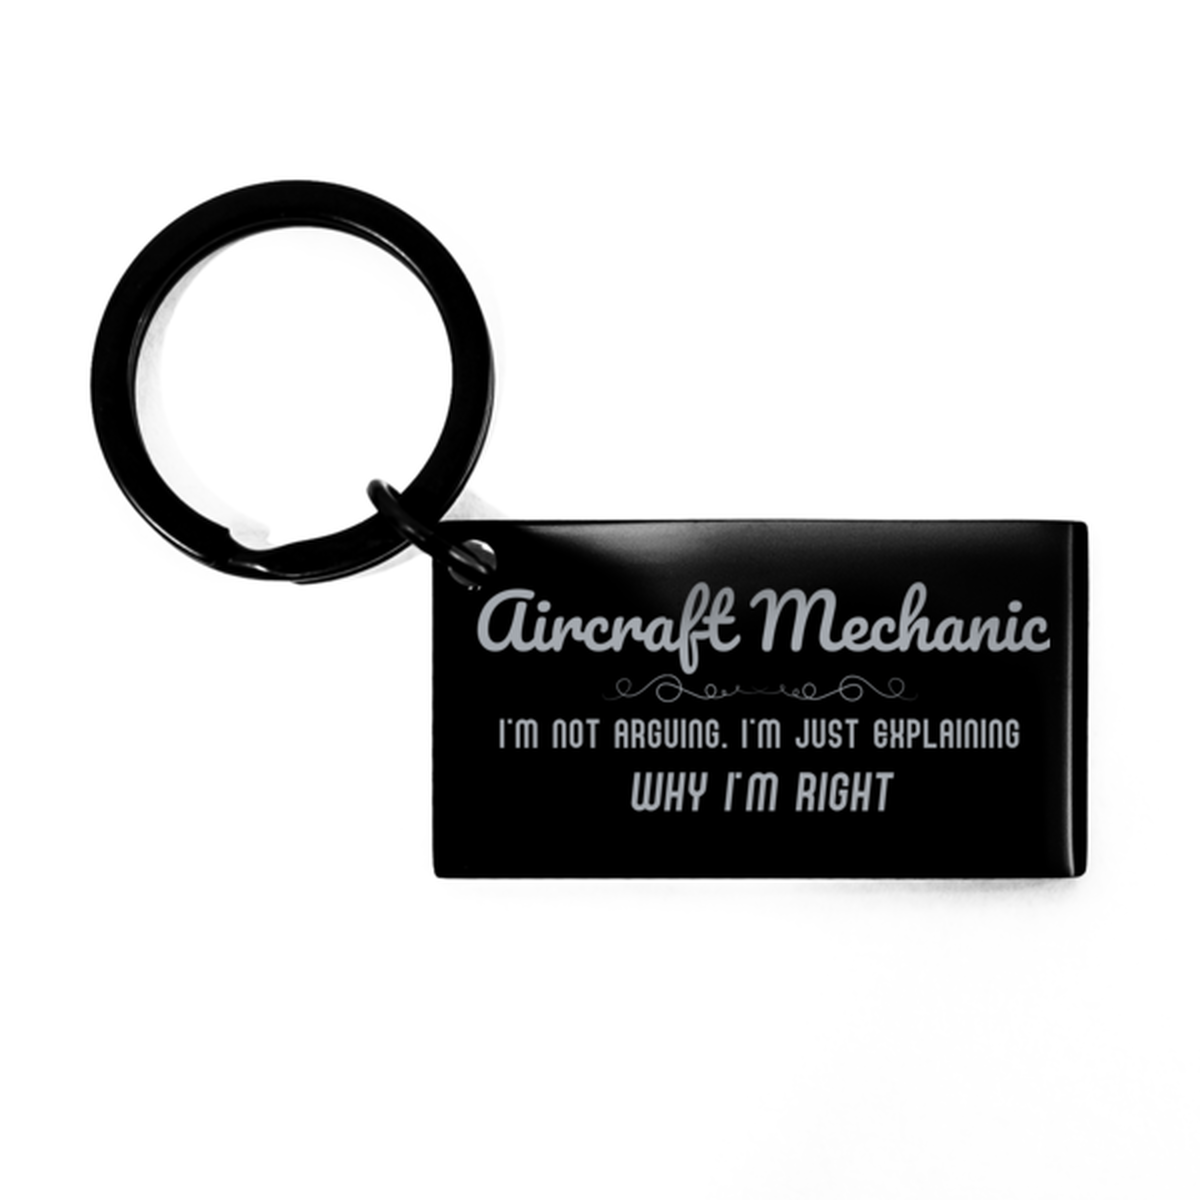 Aircraft Mechanic I'm not Arguing. I'm Just Explaining Why I'm RIGHT Keychain, Funny Saying Quote Aircraft Mechanic Gifts For Aircraft Mechanic Graduation Birthday Christmas Gifts for Men Women Coworker